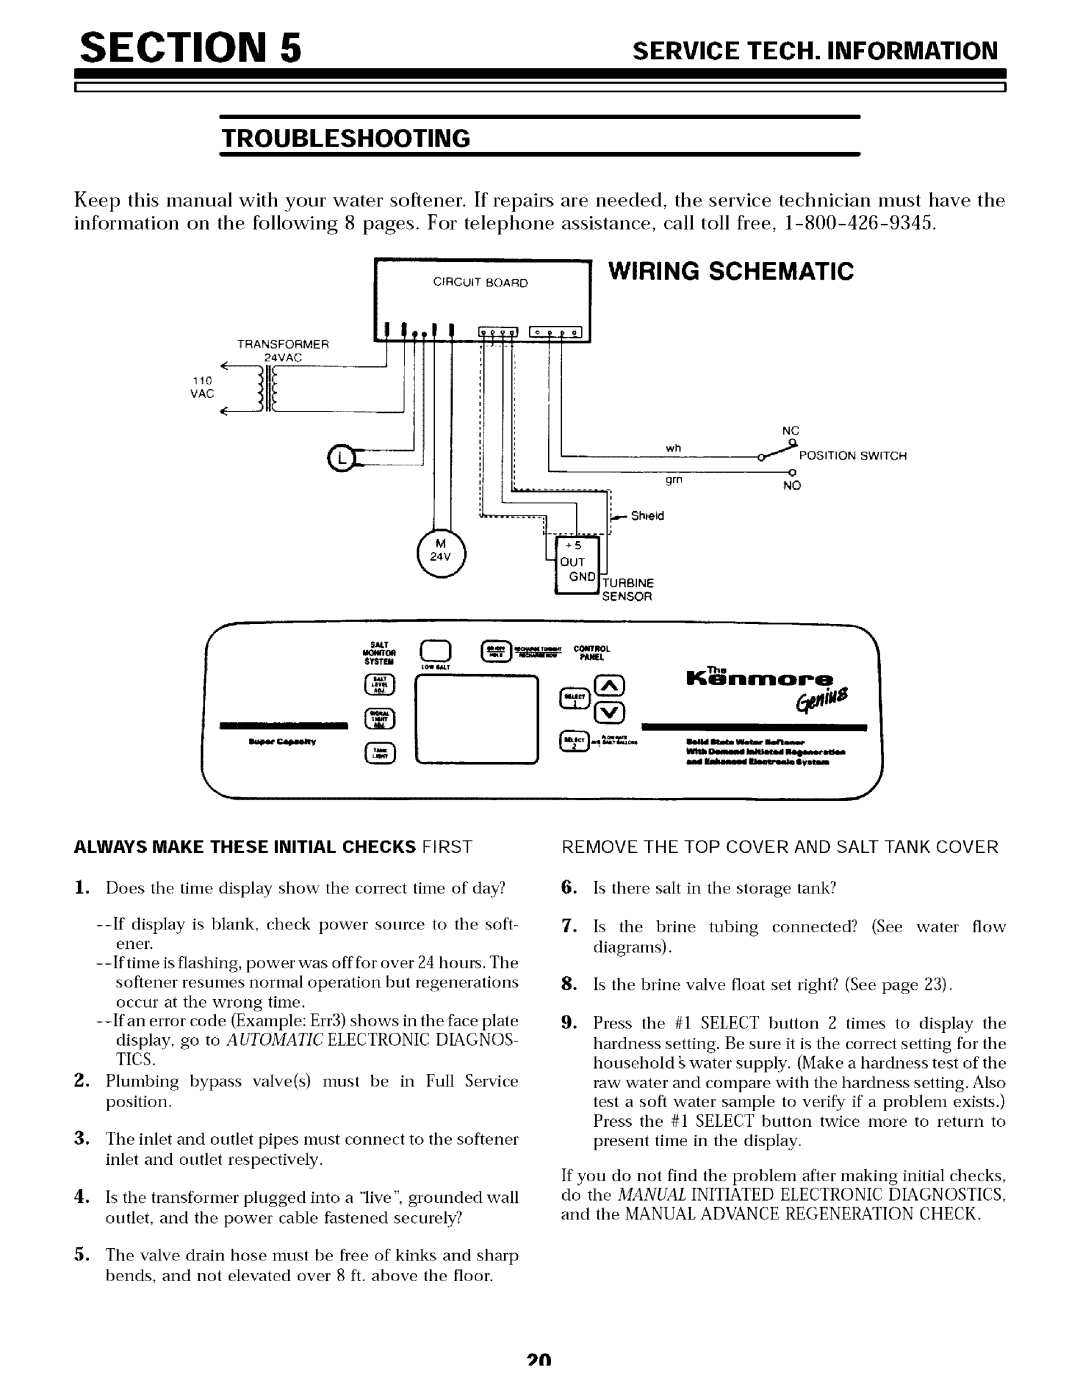 Sears 625.34854 Troubleshooting, Service TECH. Information, Wiring Schematic, Always Make These Initial Checks First 